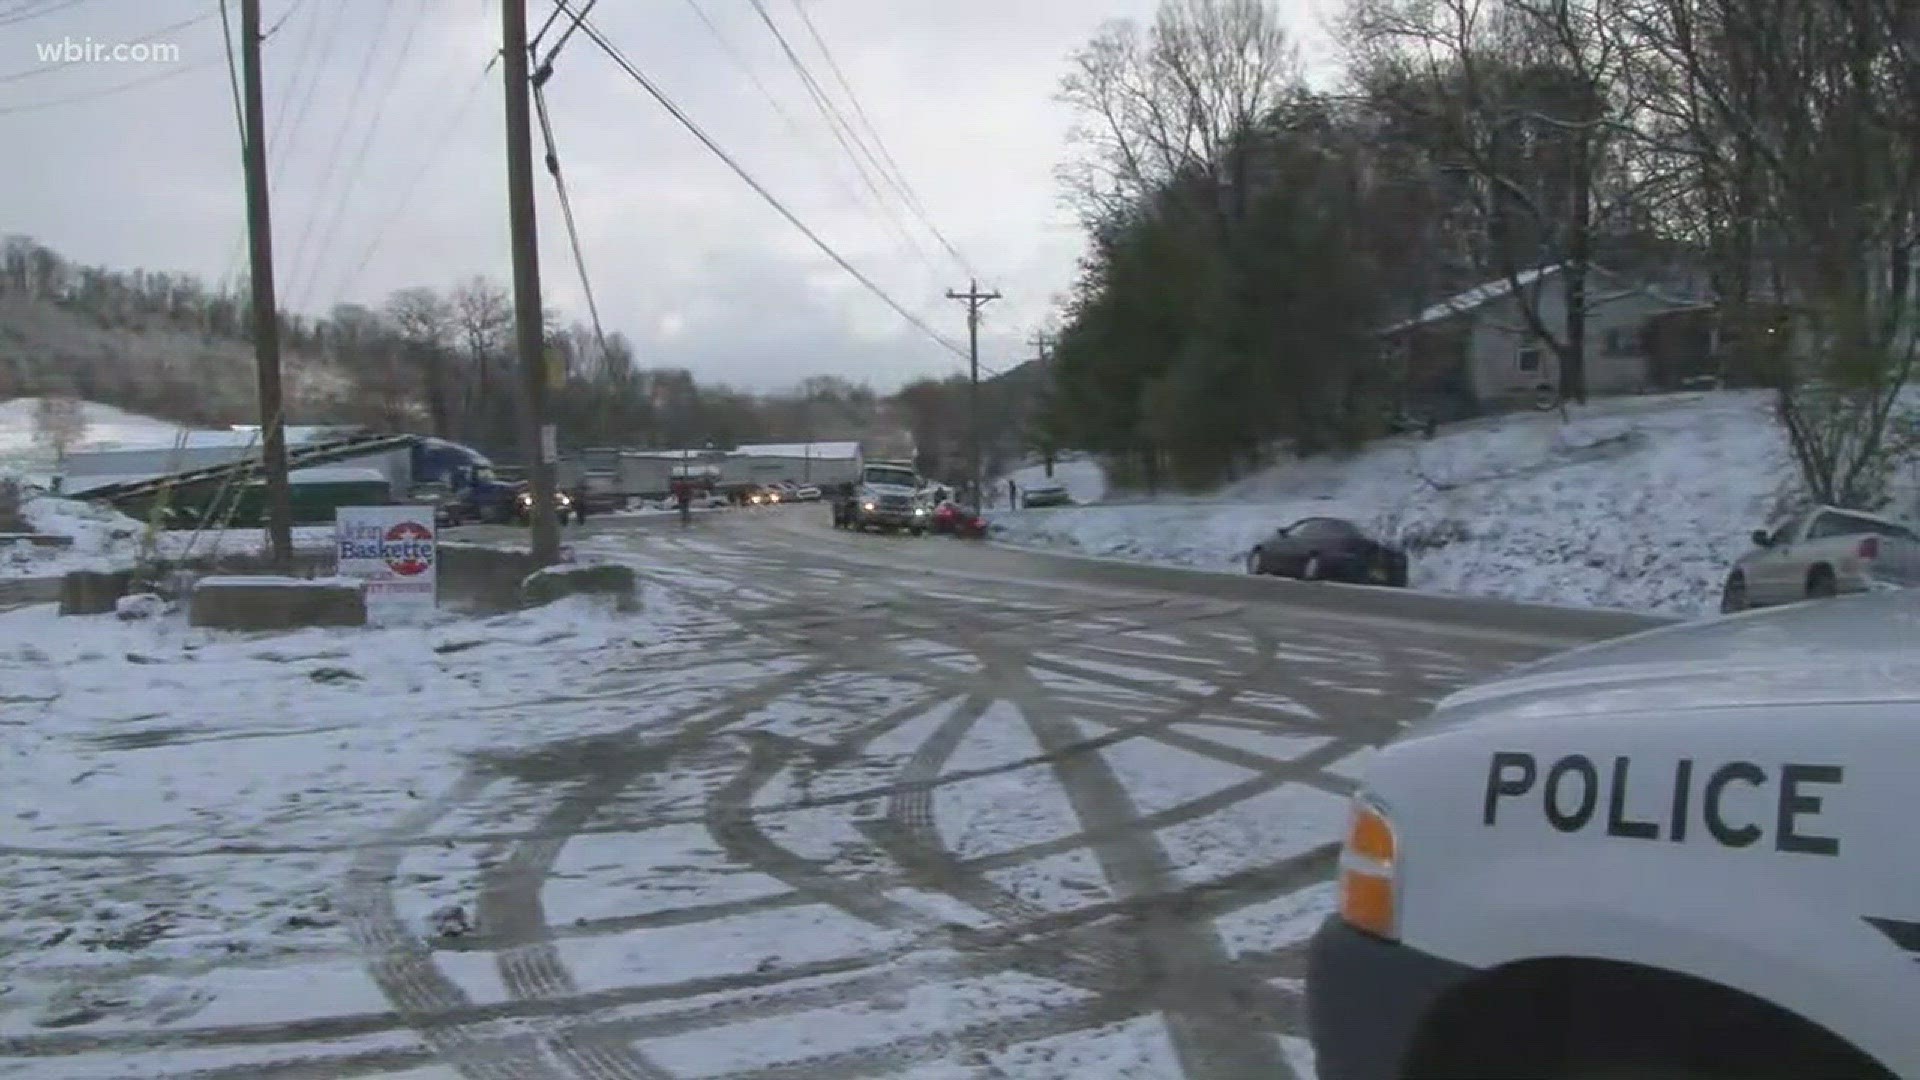 Cars were off the road in many places because of icy conditions.